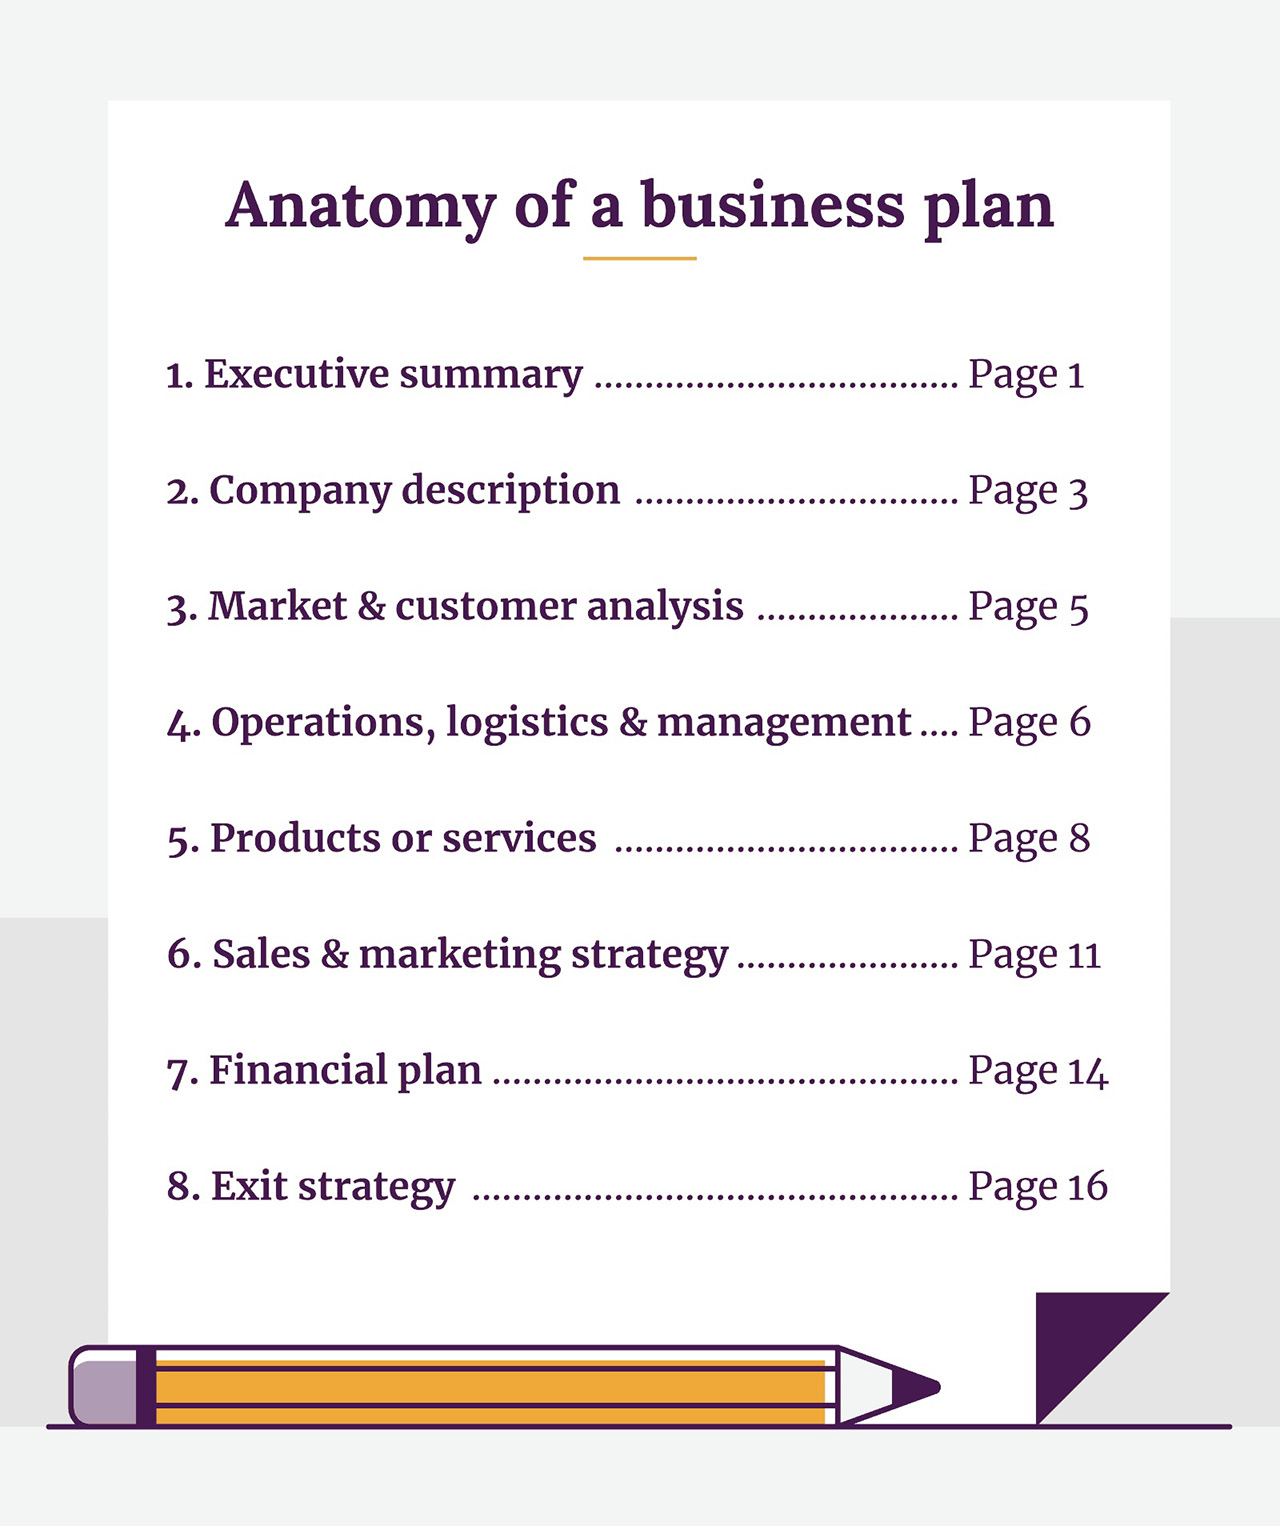 users of business plan